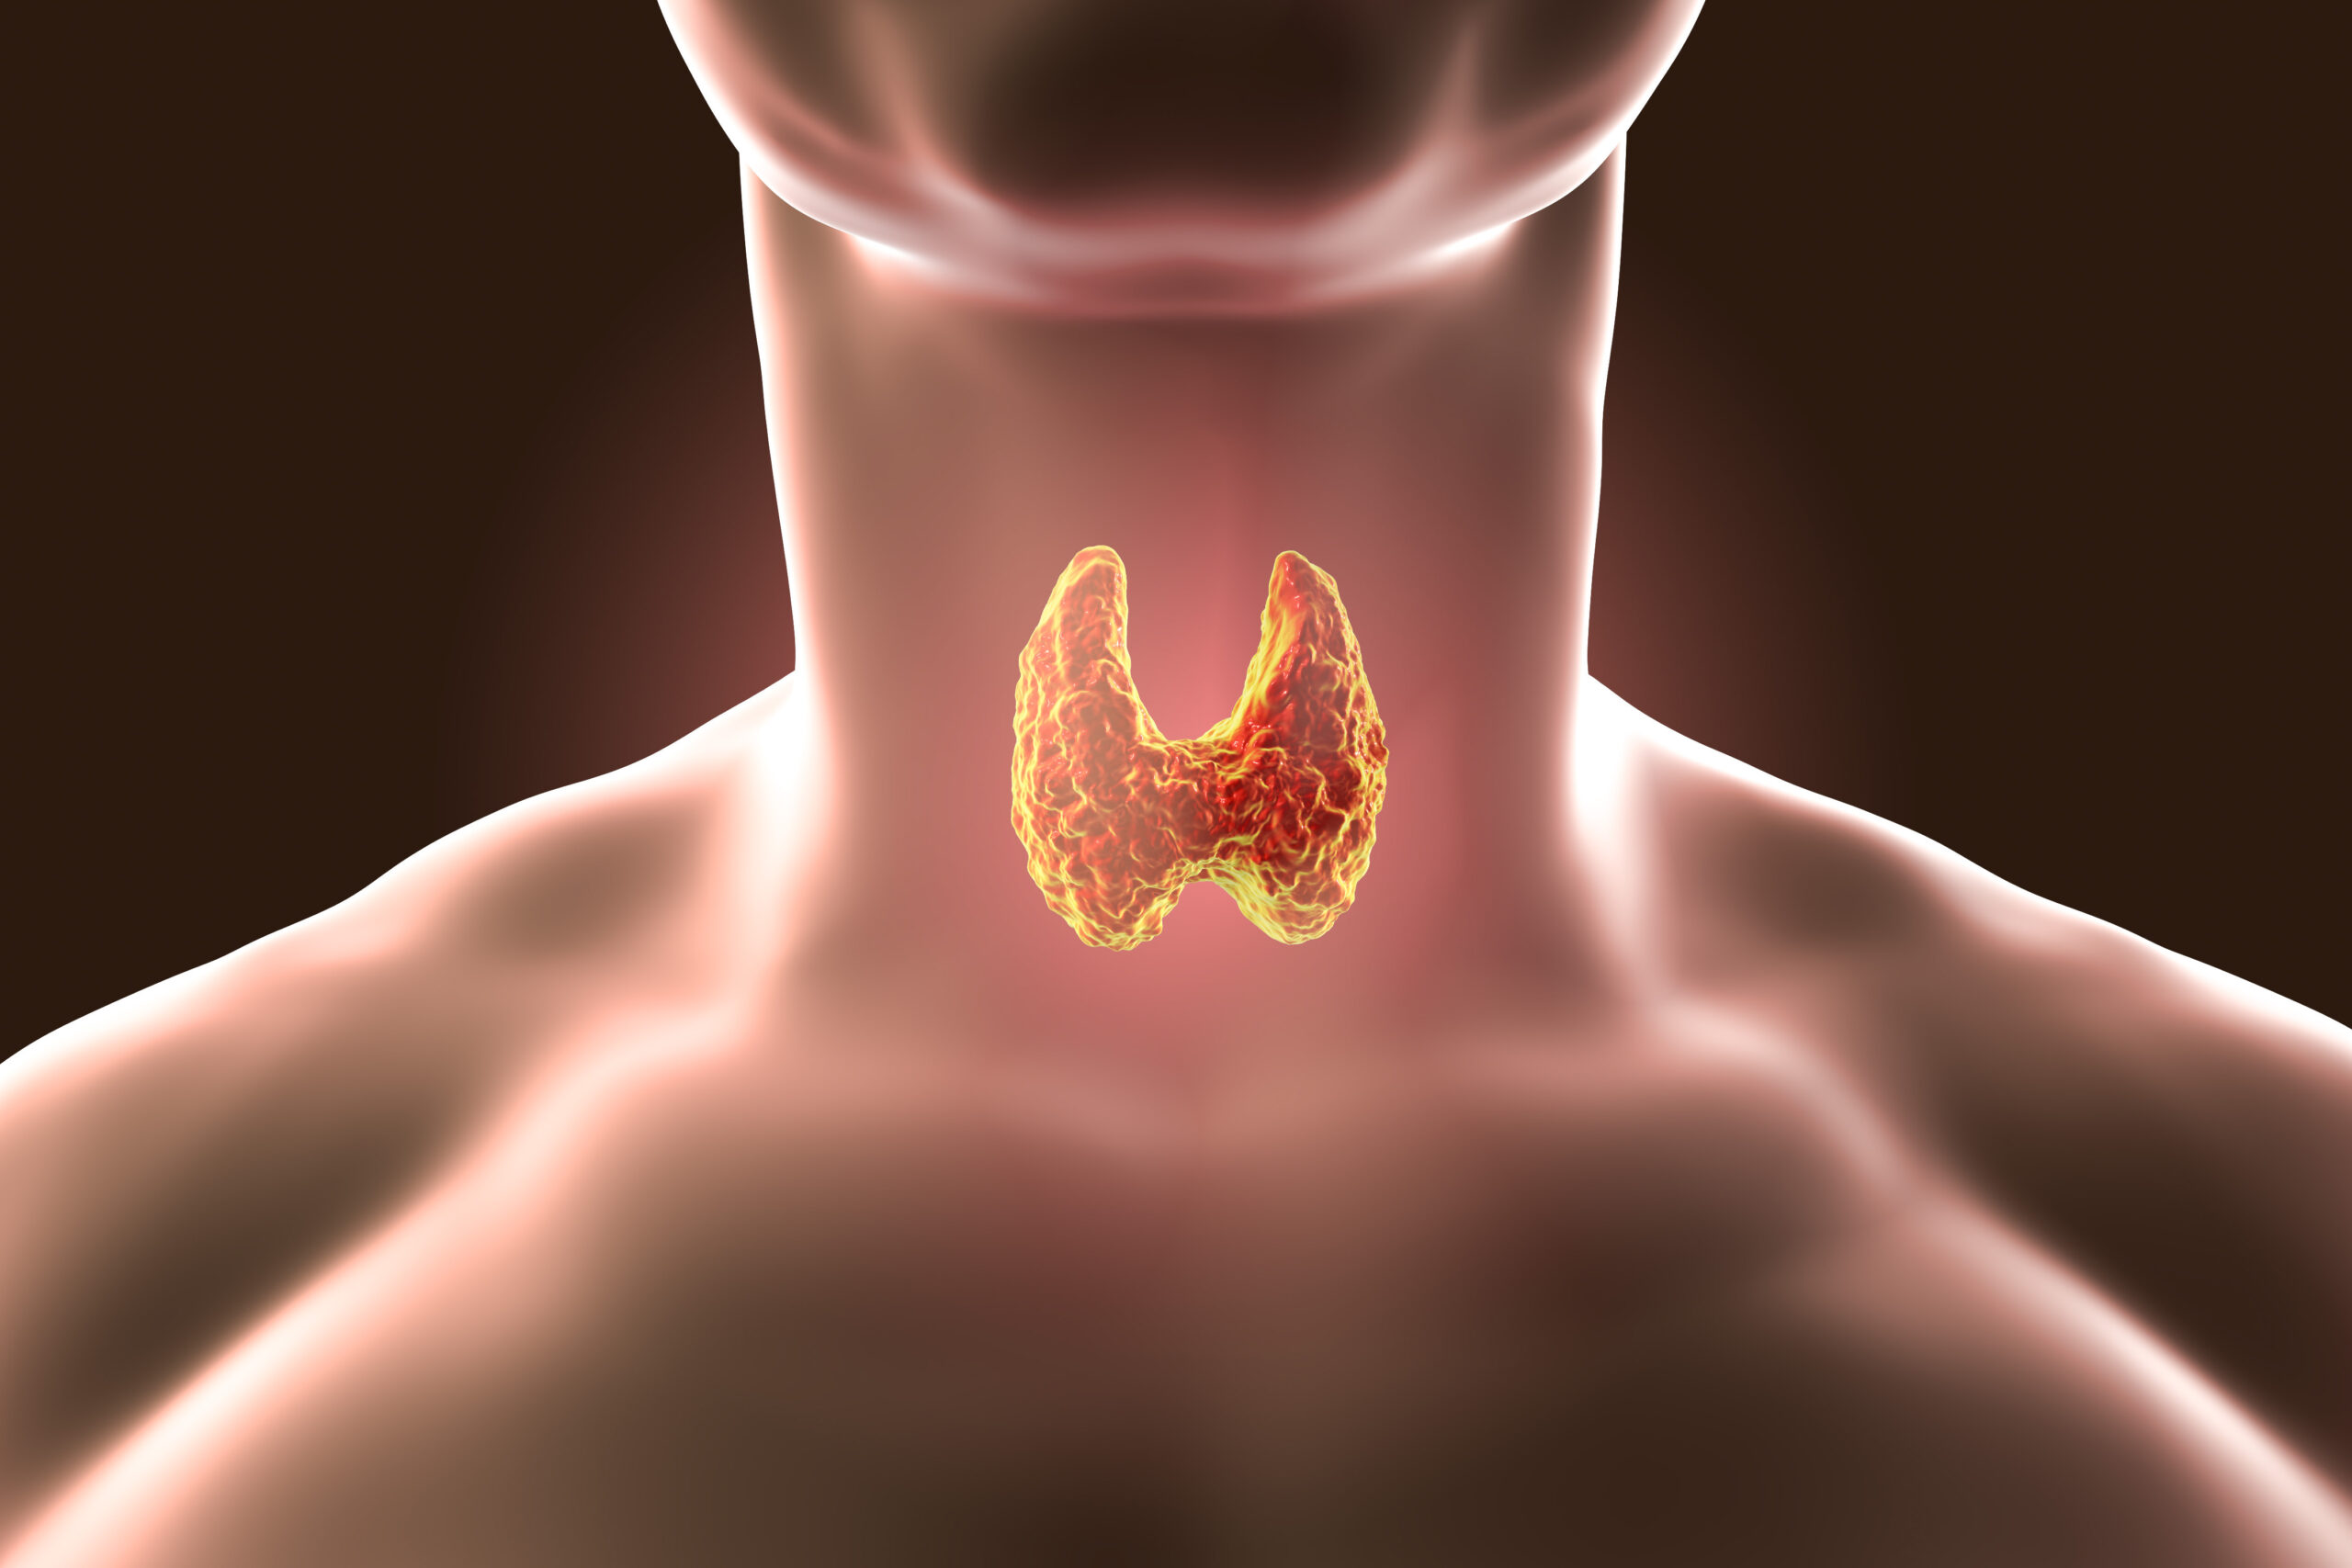 Symptoms of Thyroid Dysfunction You Might Not Expect - Marion Gluck